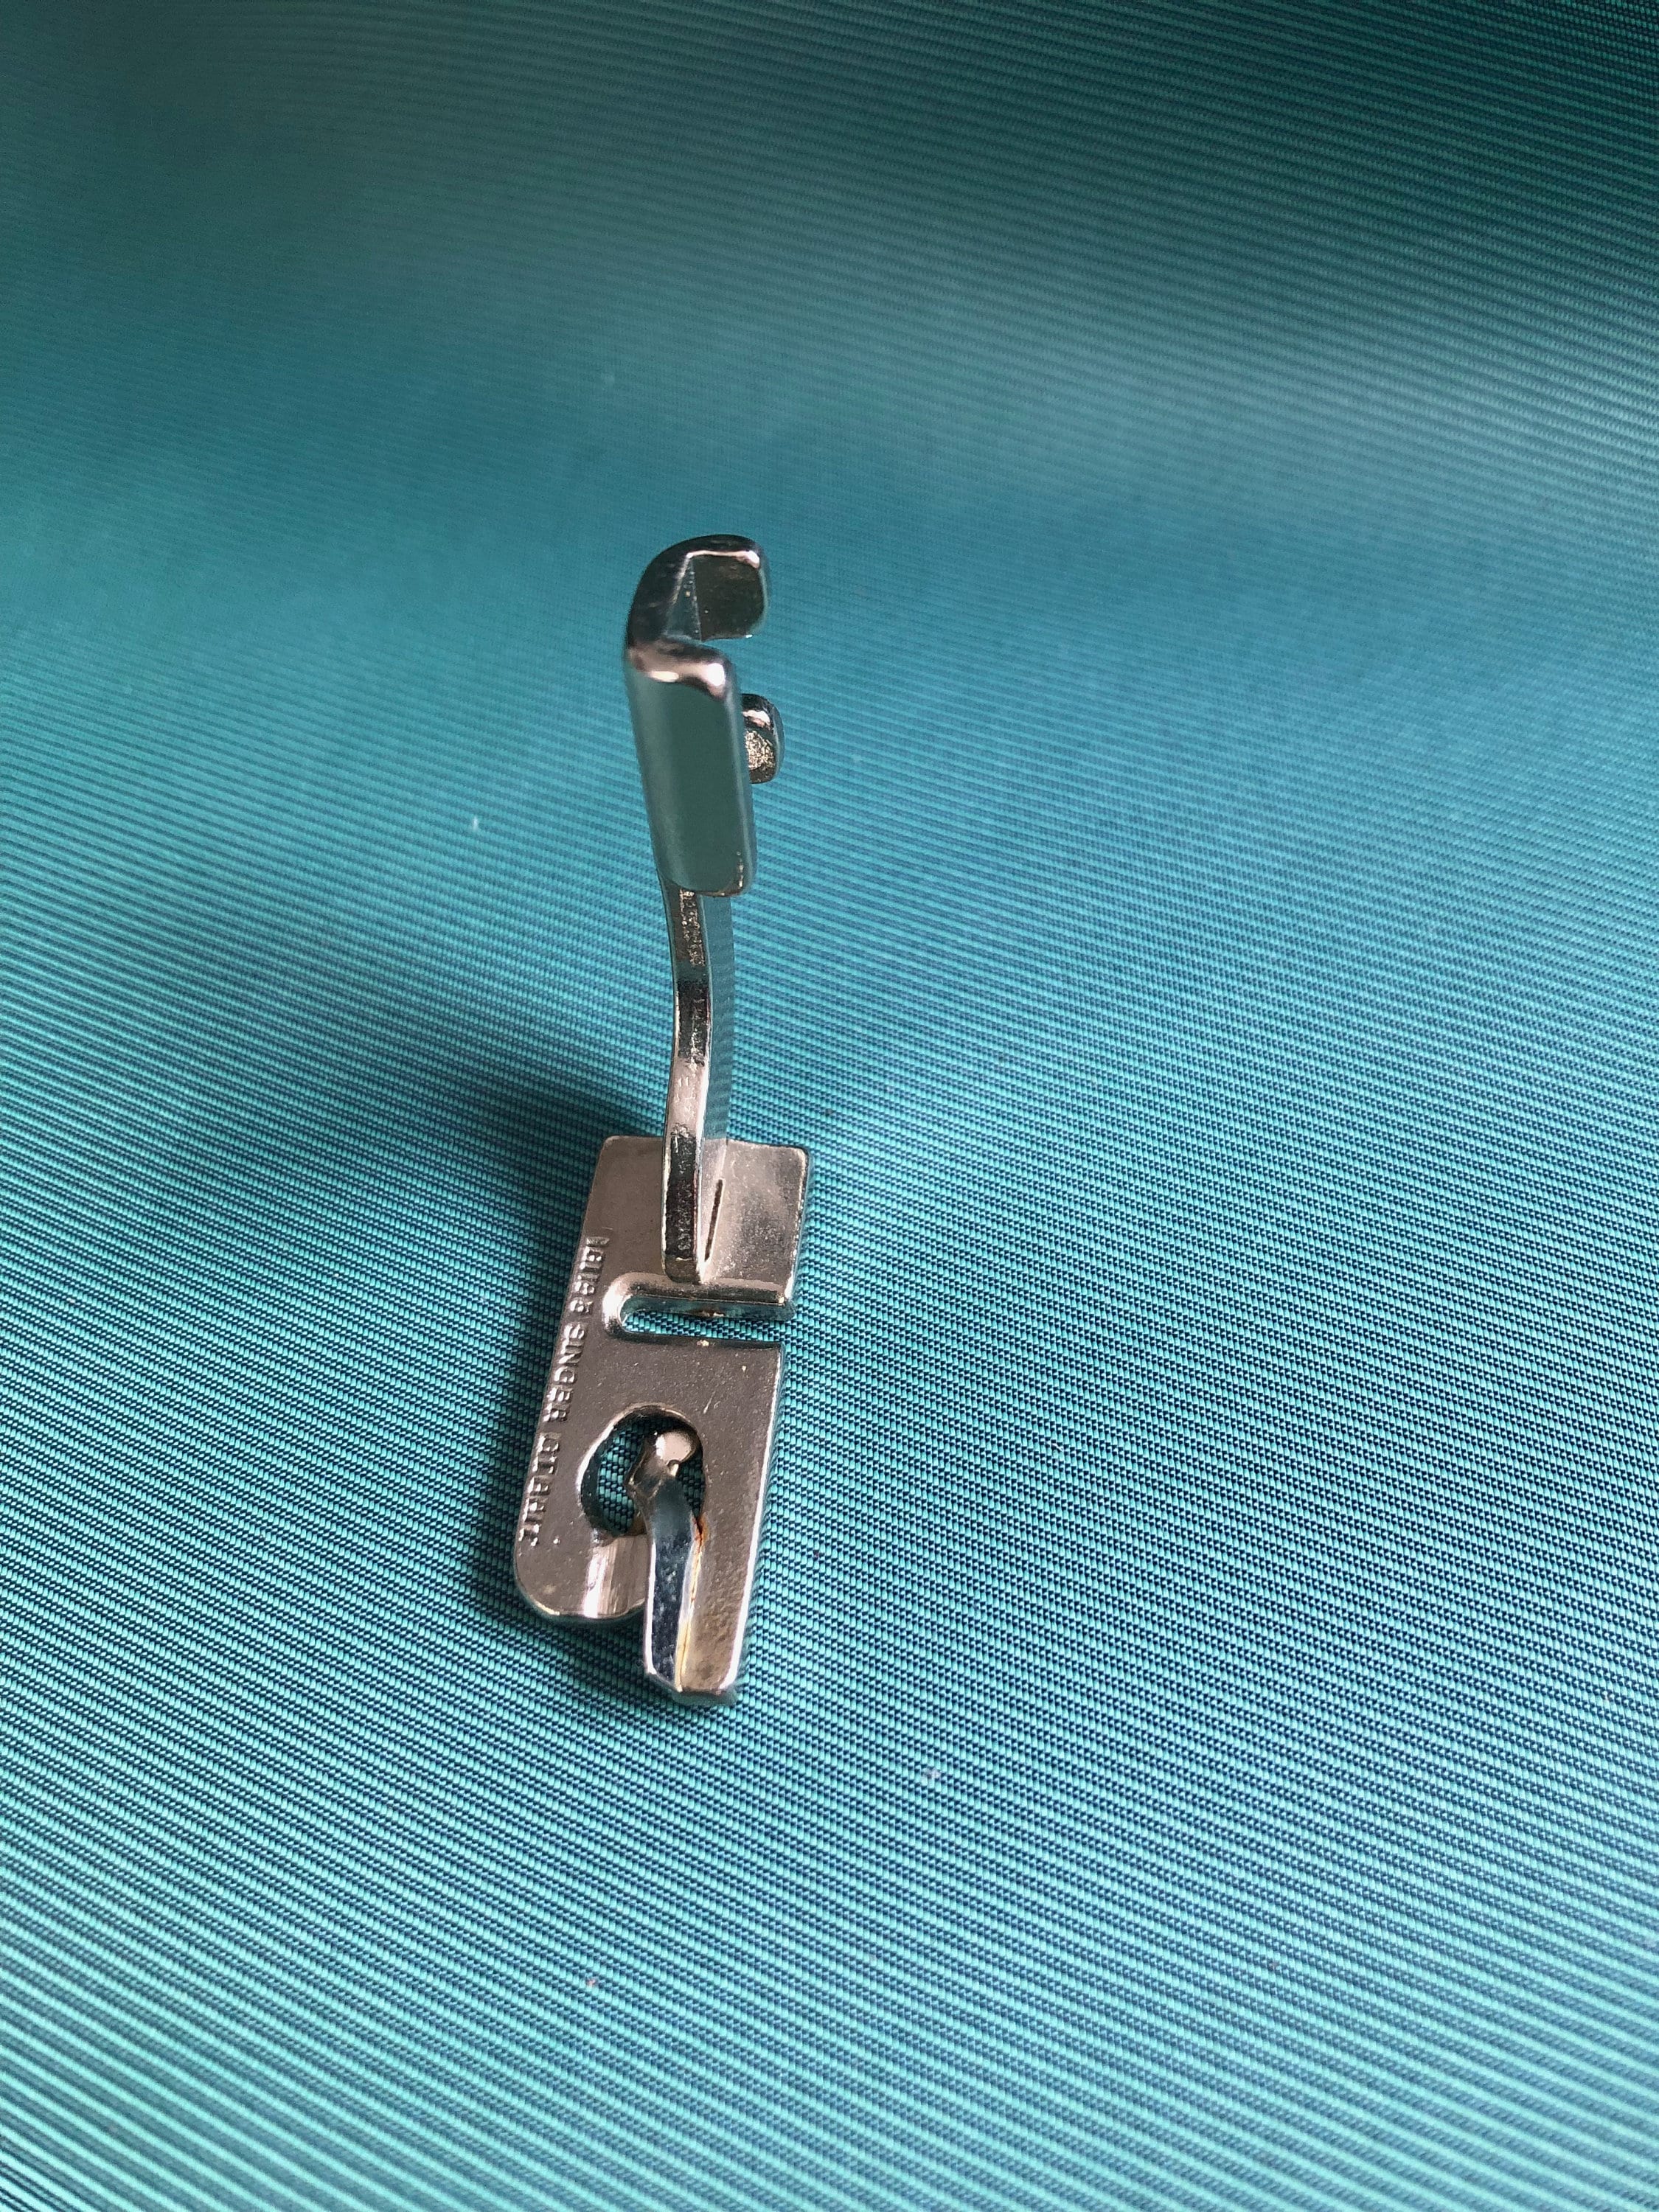 Singer Old Style Vertical Needle Low Shank Snap-on Zipper Foot for Narrow  Low Shank Foot Holder 